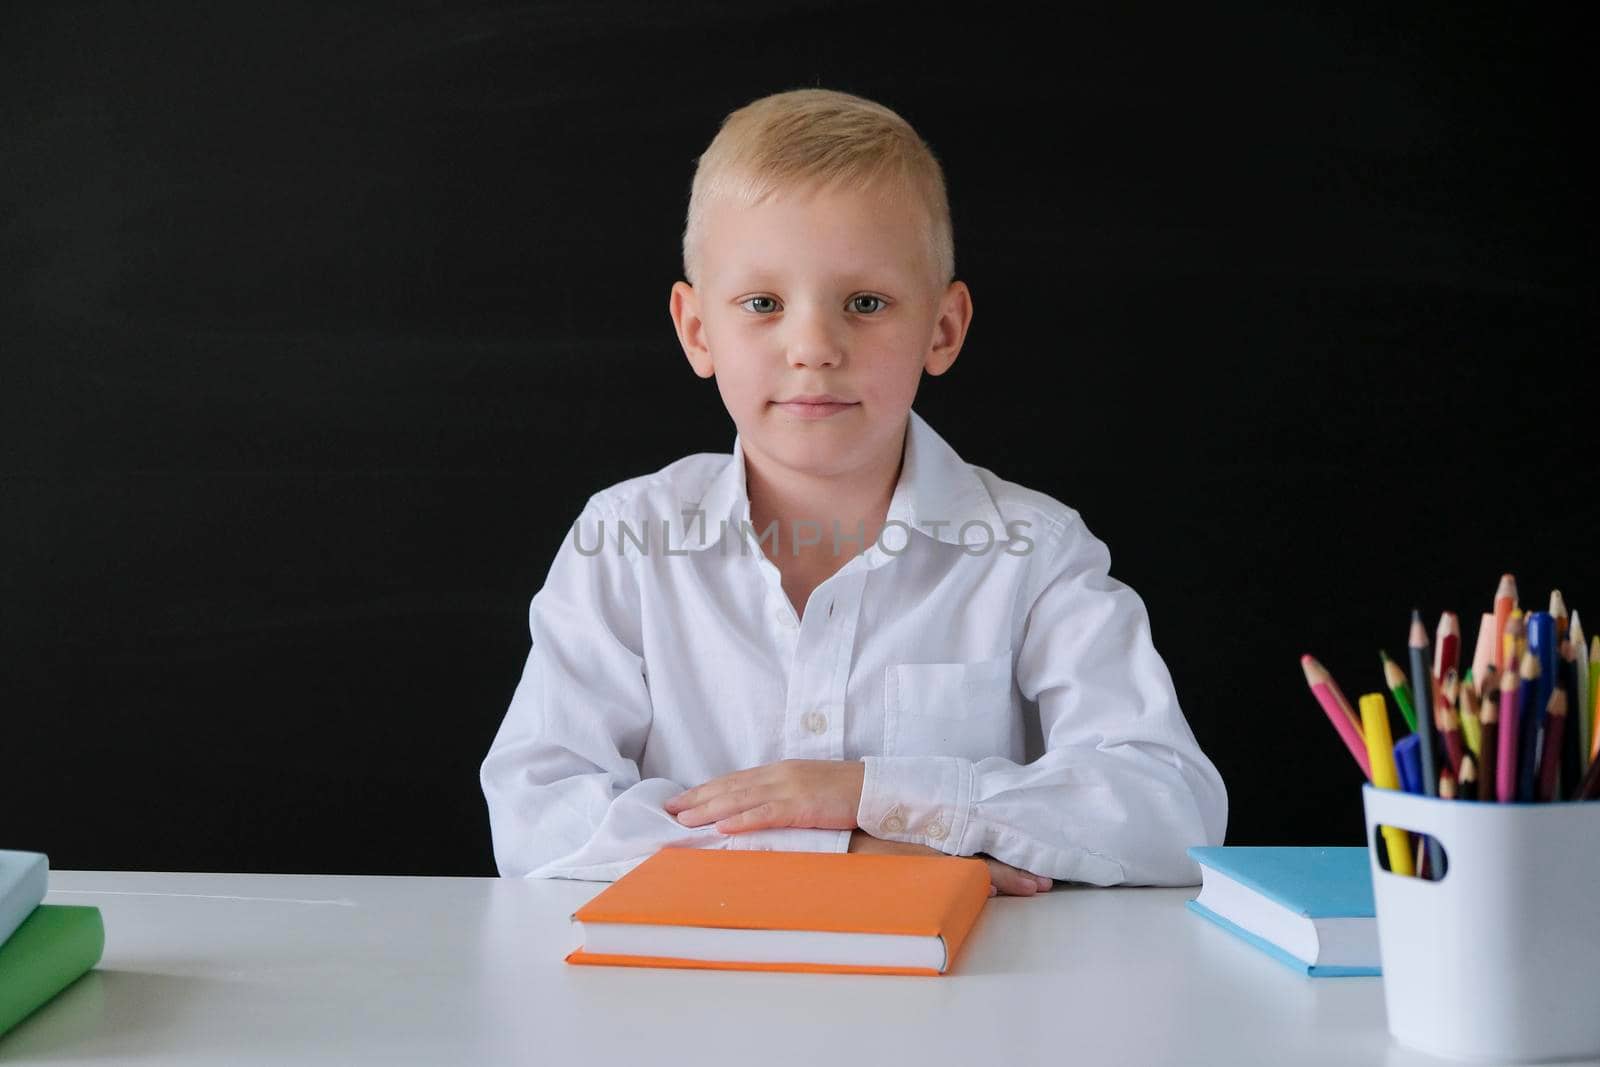 Cute little boy sitting at the table on blackboard backgrpund. Child from elementary school. Education concept.